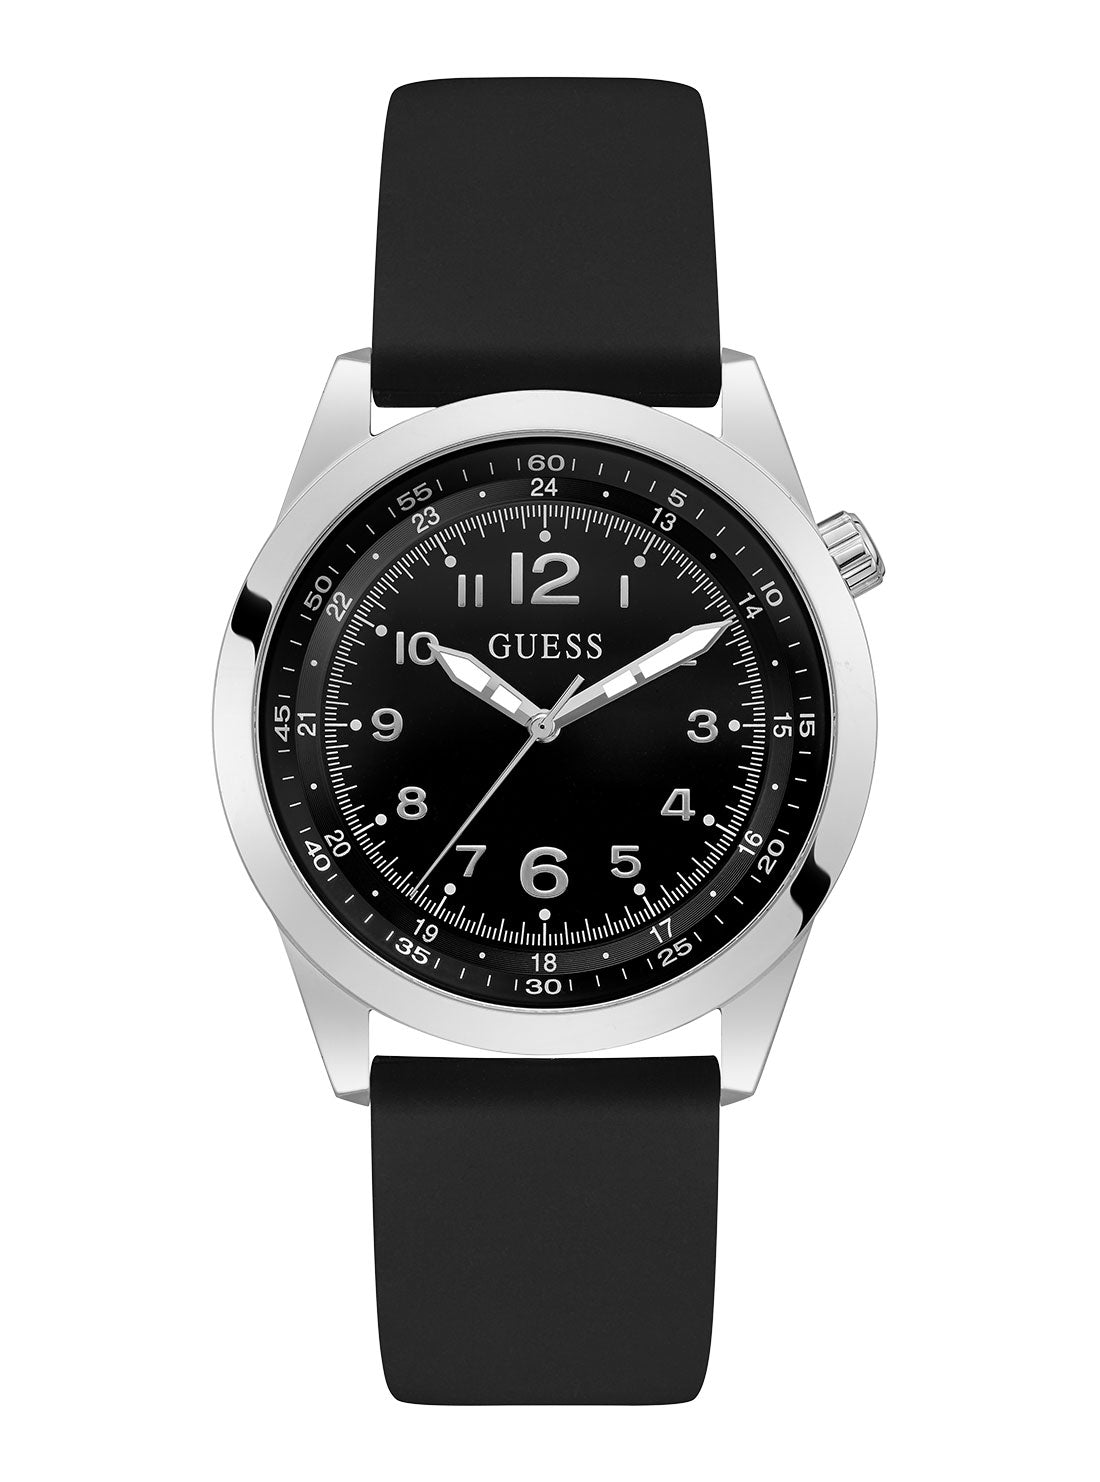 GUESS Men's Black Silver Max Silicone Watch GW0494G1 Front View